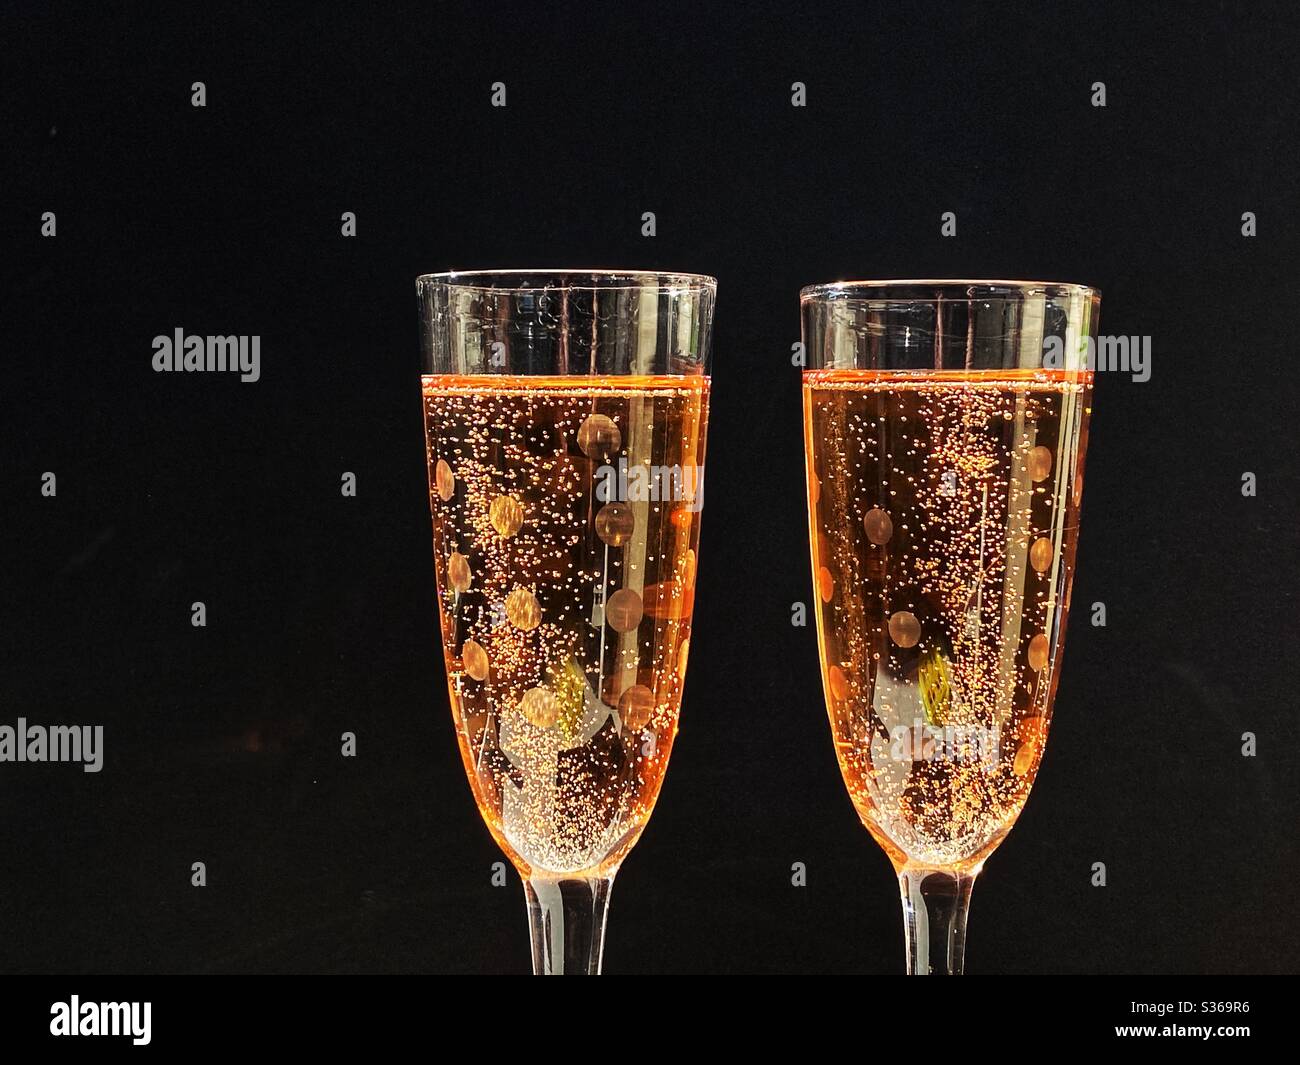 Pair of glasses full of pink champagne against a black background. No people. Space for copy. Stock Photo